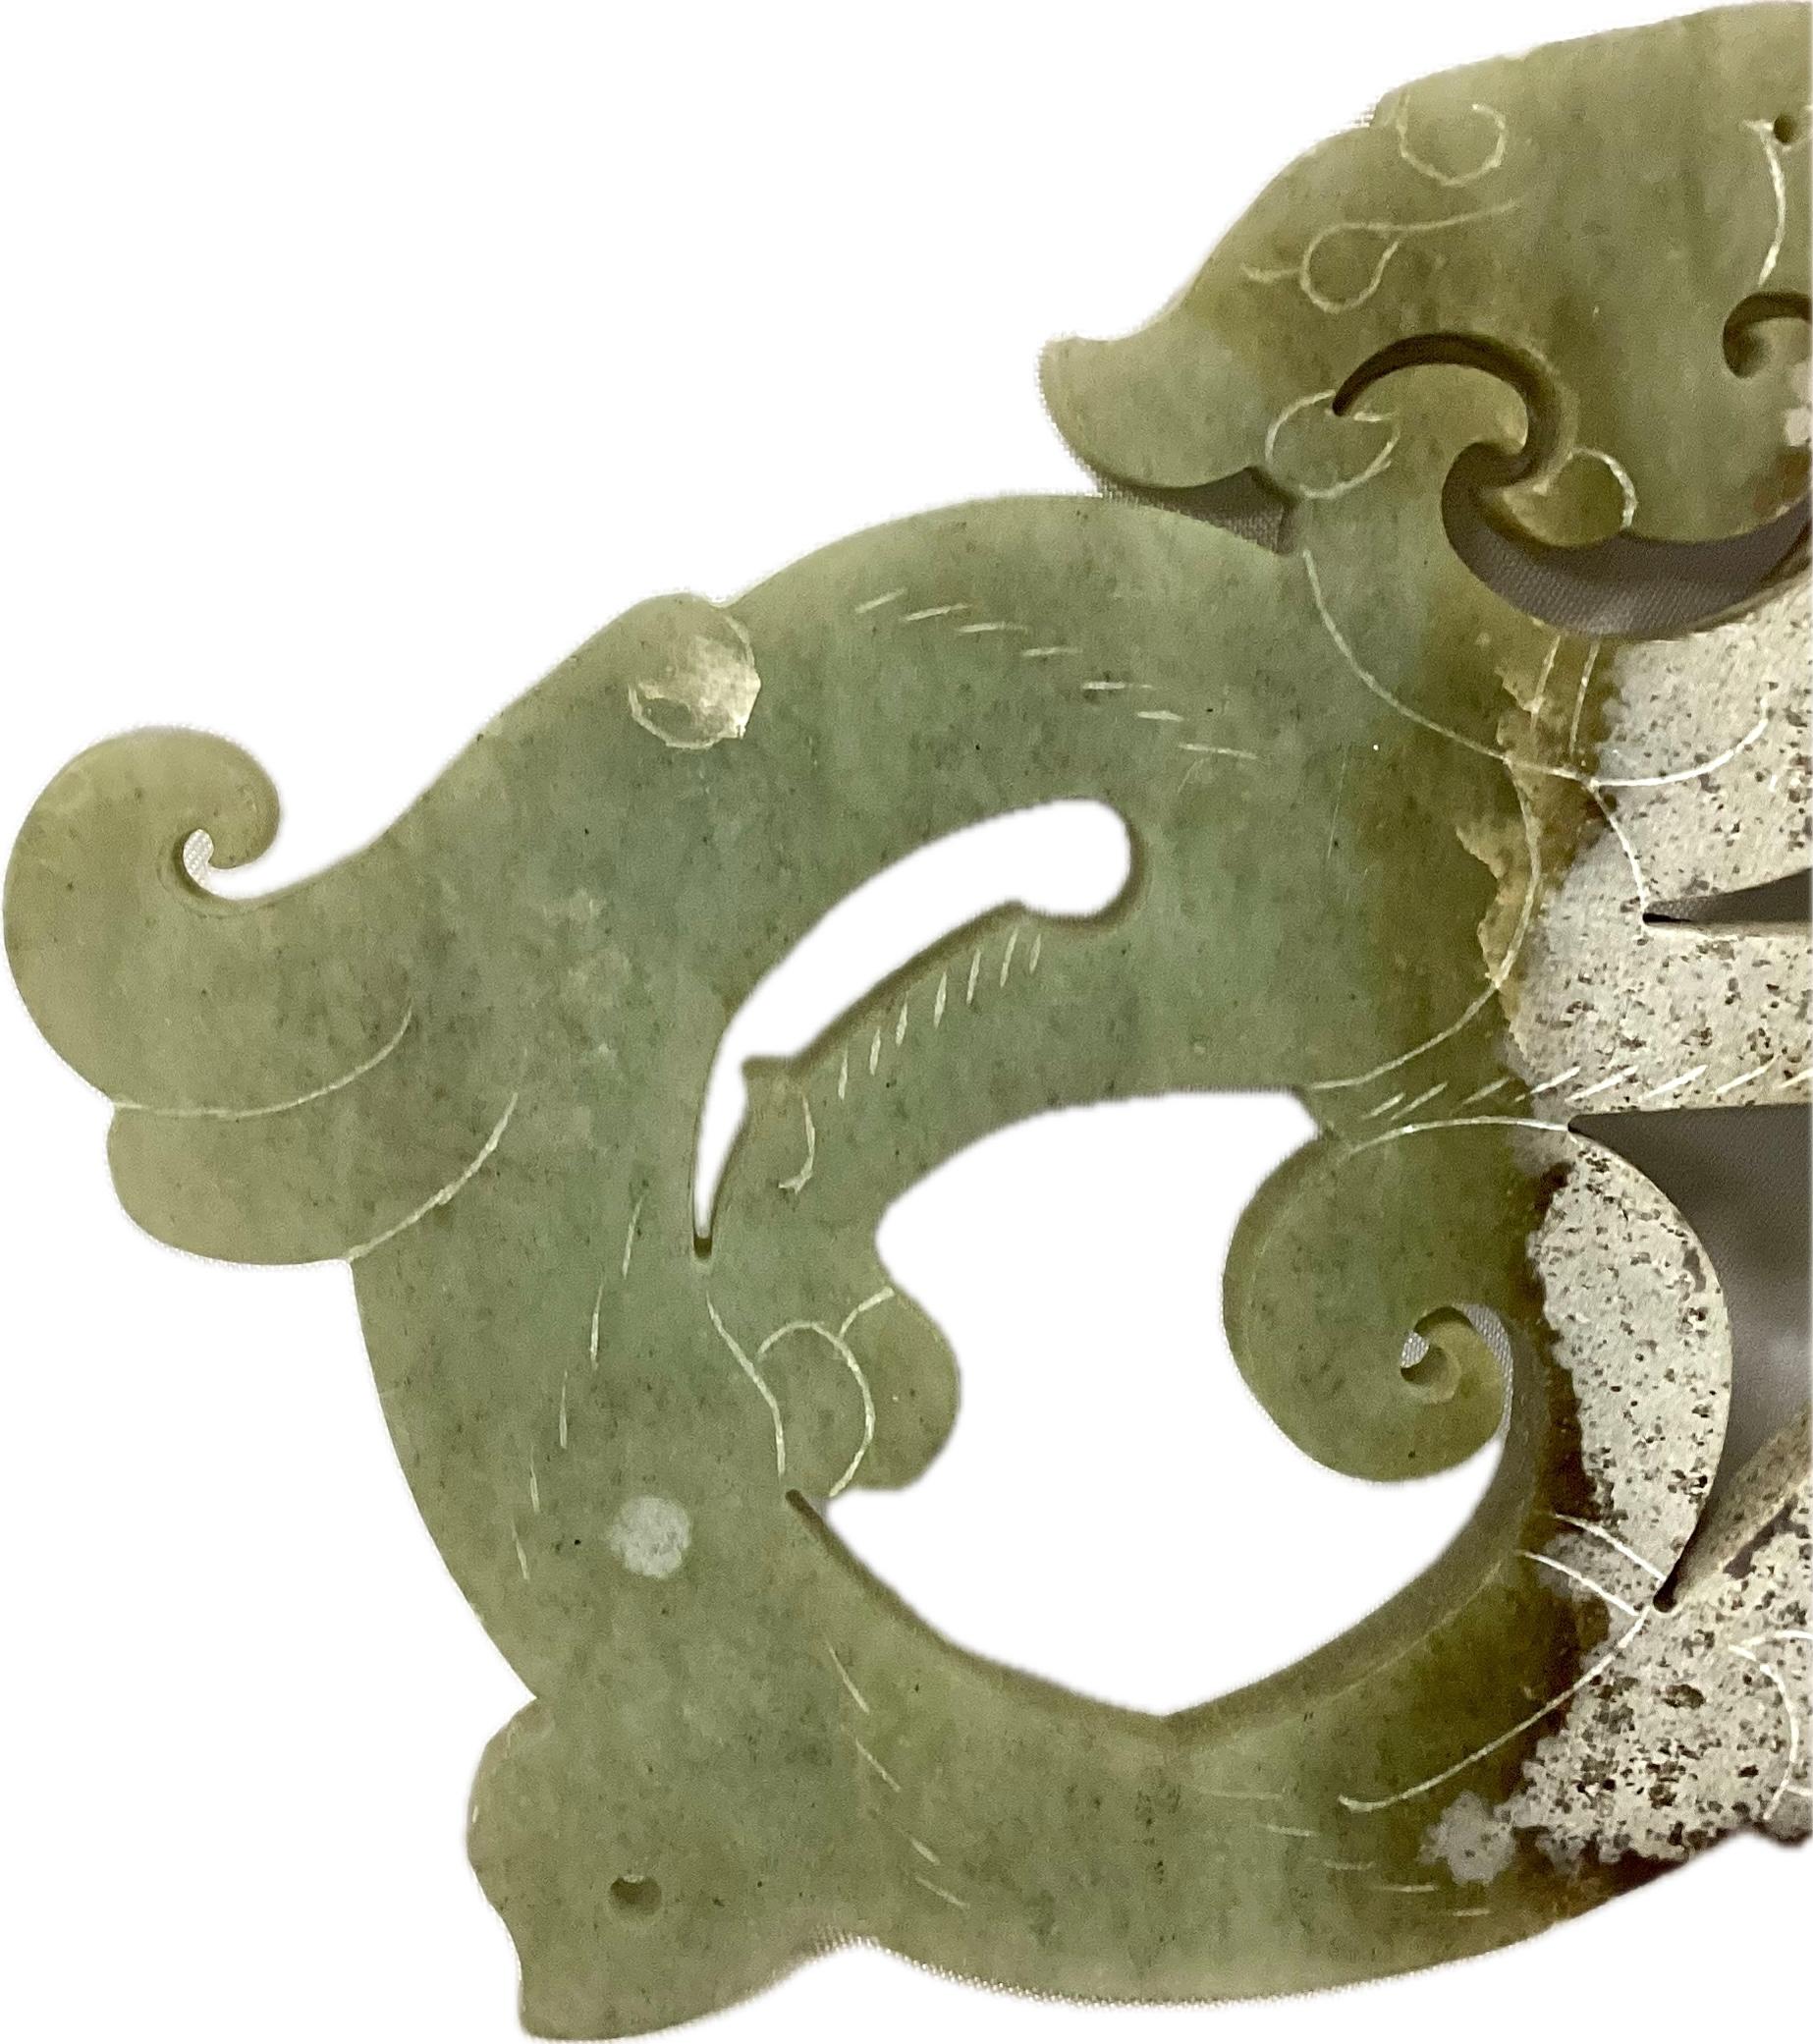 Chinese Open Work Carved white and green jade dragon and phoenix plaque. Plaque features coiling entwined dragon and phoenix, each with curling scrollwork from tails and bodies with delicate incised markings.   Has three small holes for hanging. 